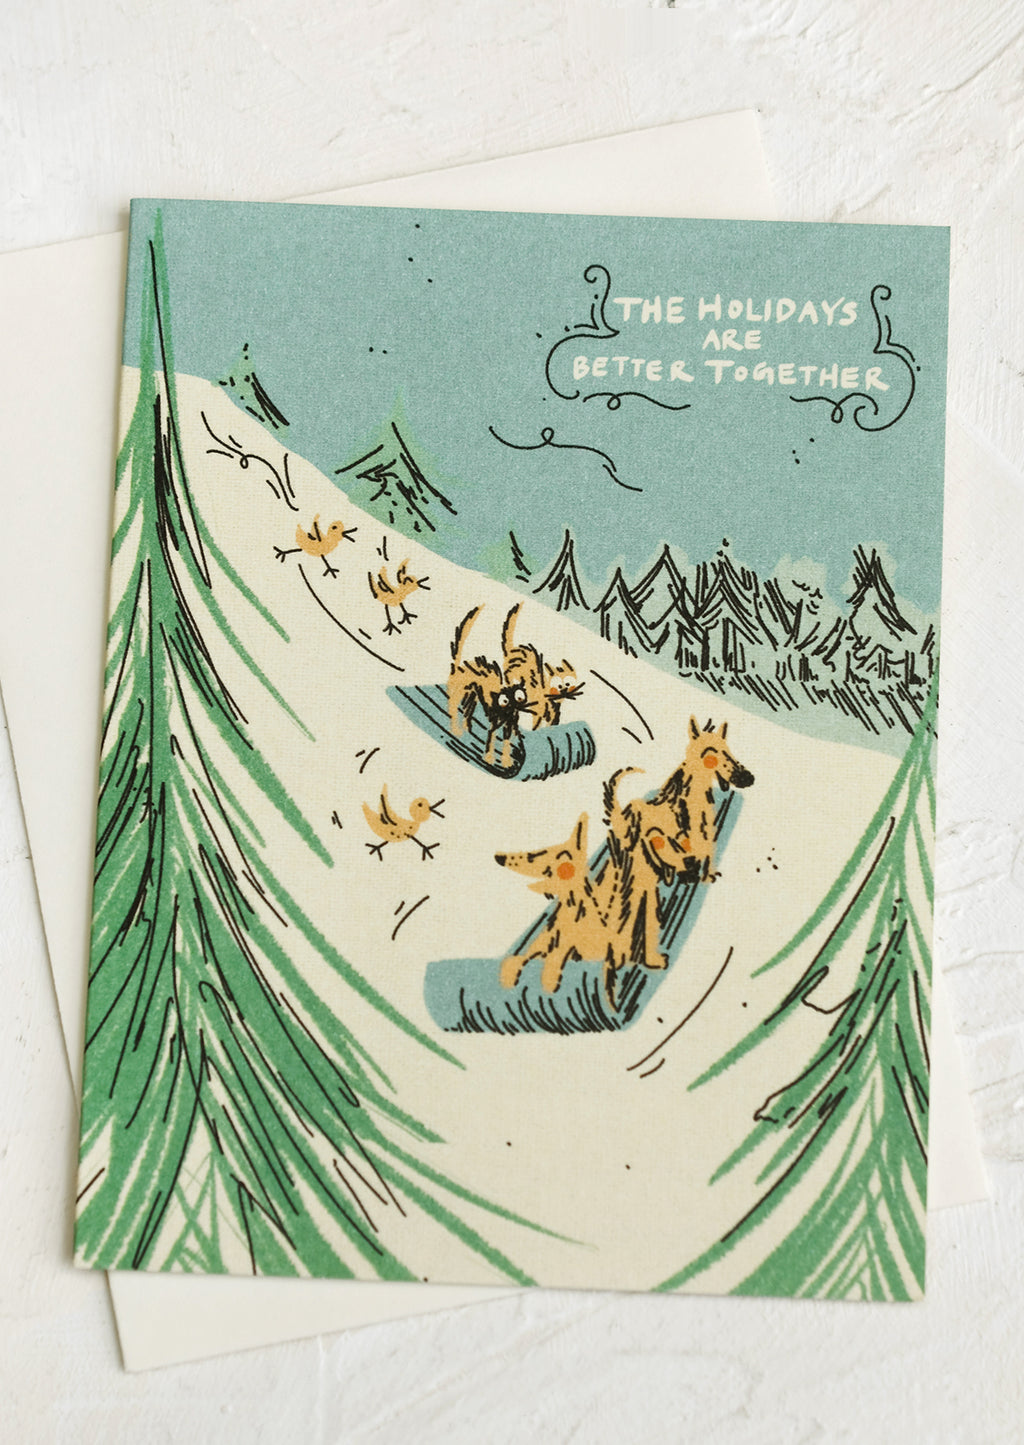 2: Greeting cards with illustration of dogs sledding down a hill, text reads "The Holidays Are Better Together".